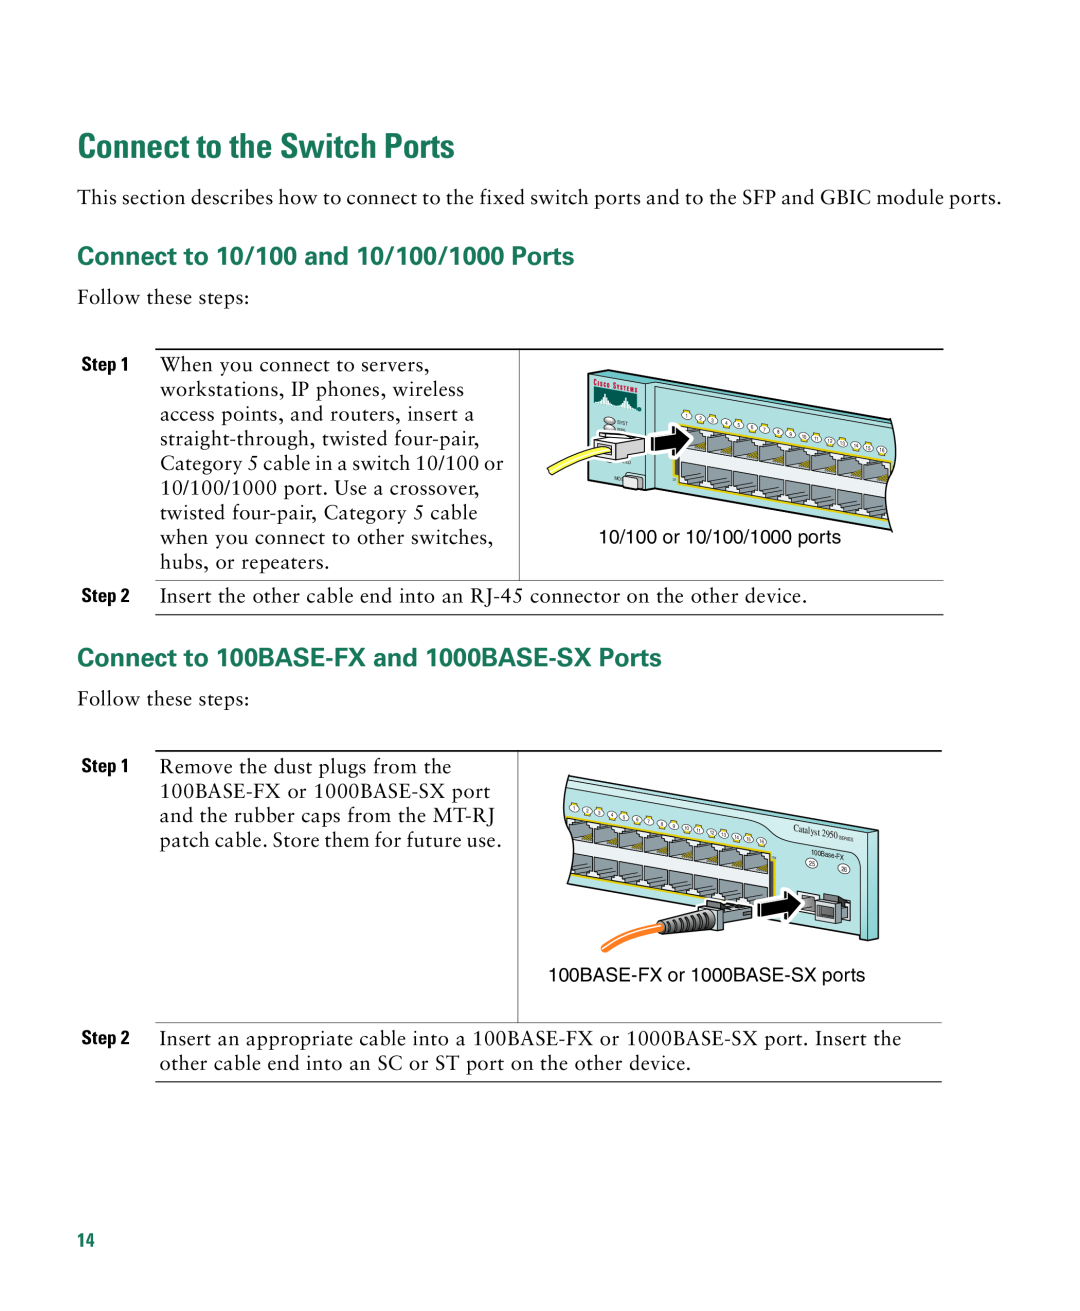 Cisco Systems CATALYST 2950 manual Connect to the Switch Ports, Connect to 10/100 and 10/100/1000 Ports 